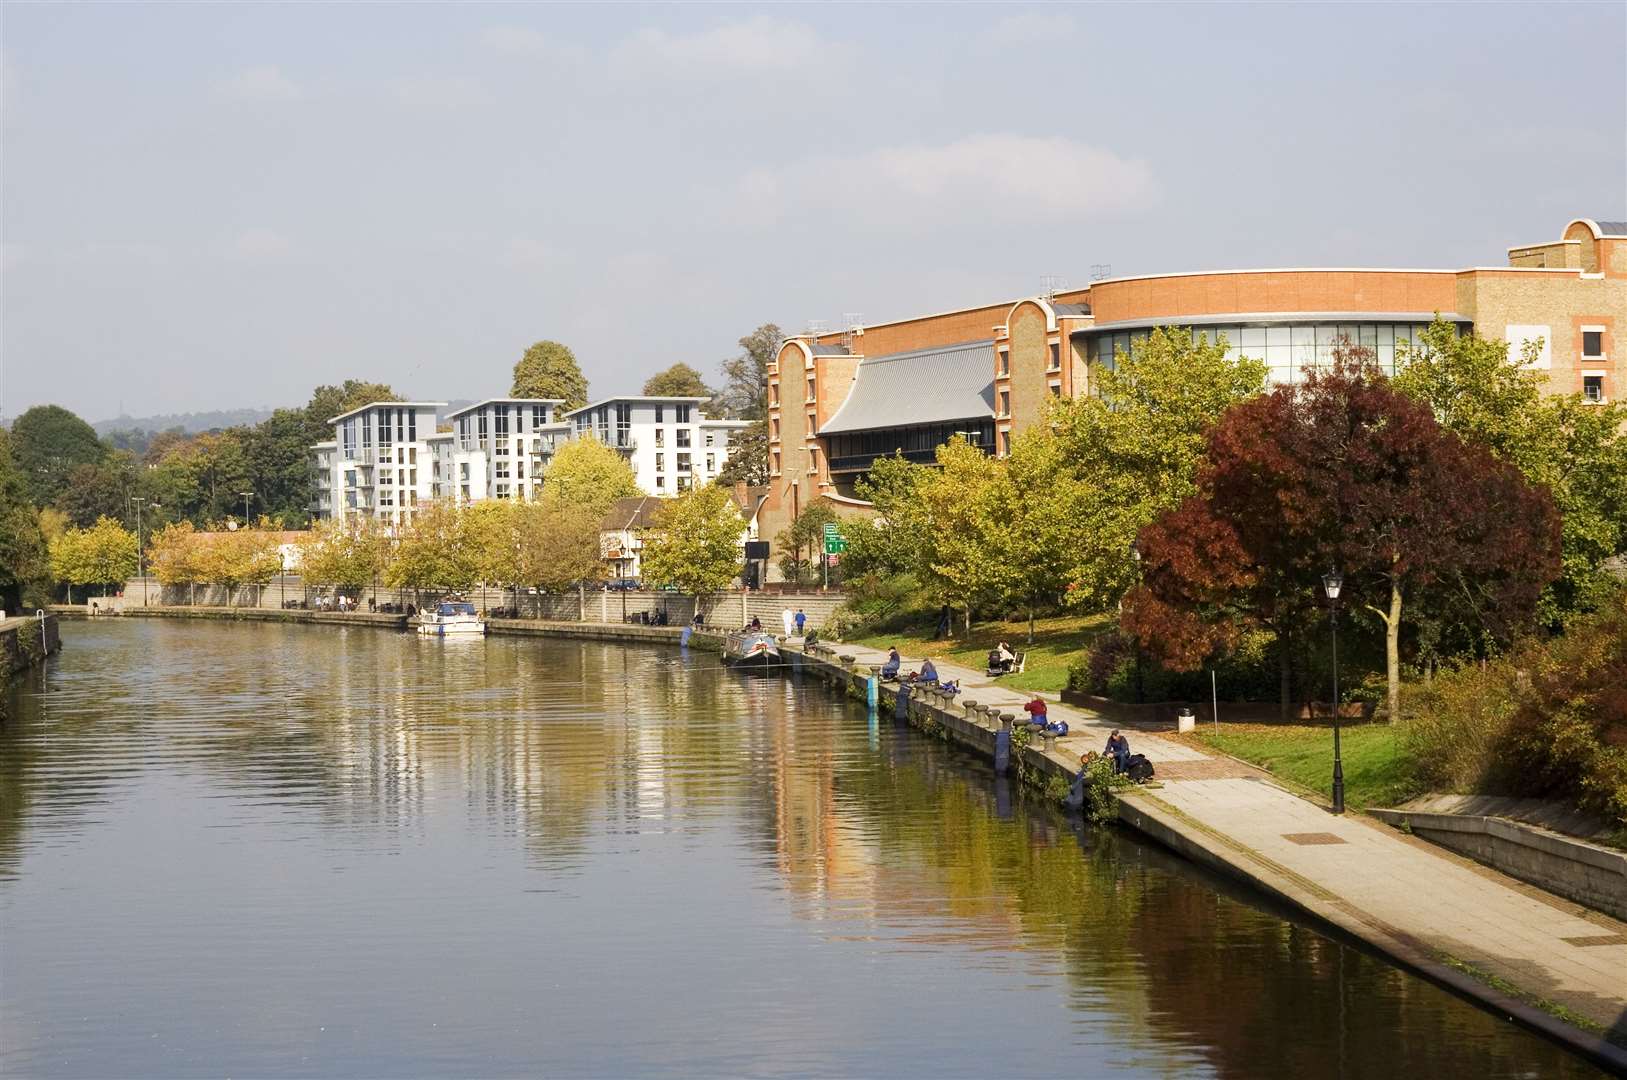 The county town Maidstone is divided by the River Medway